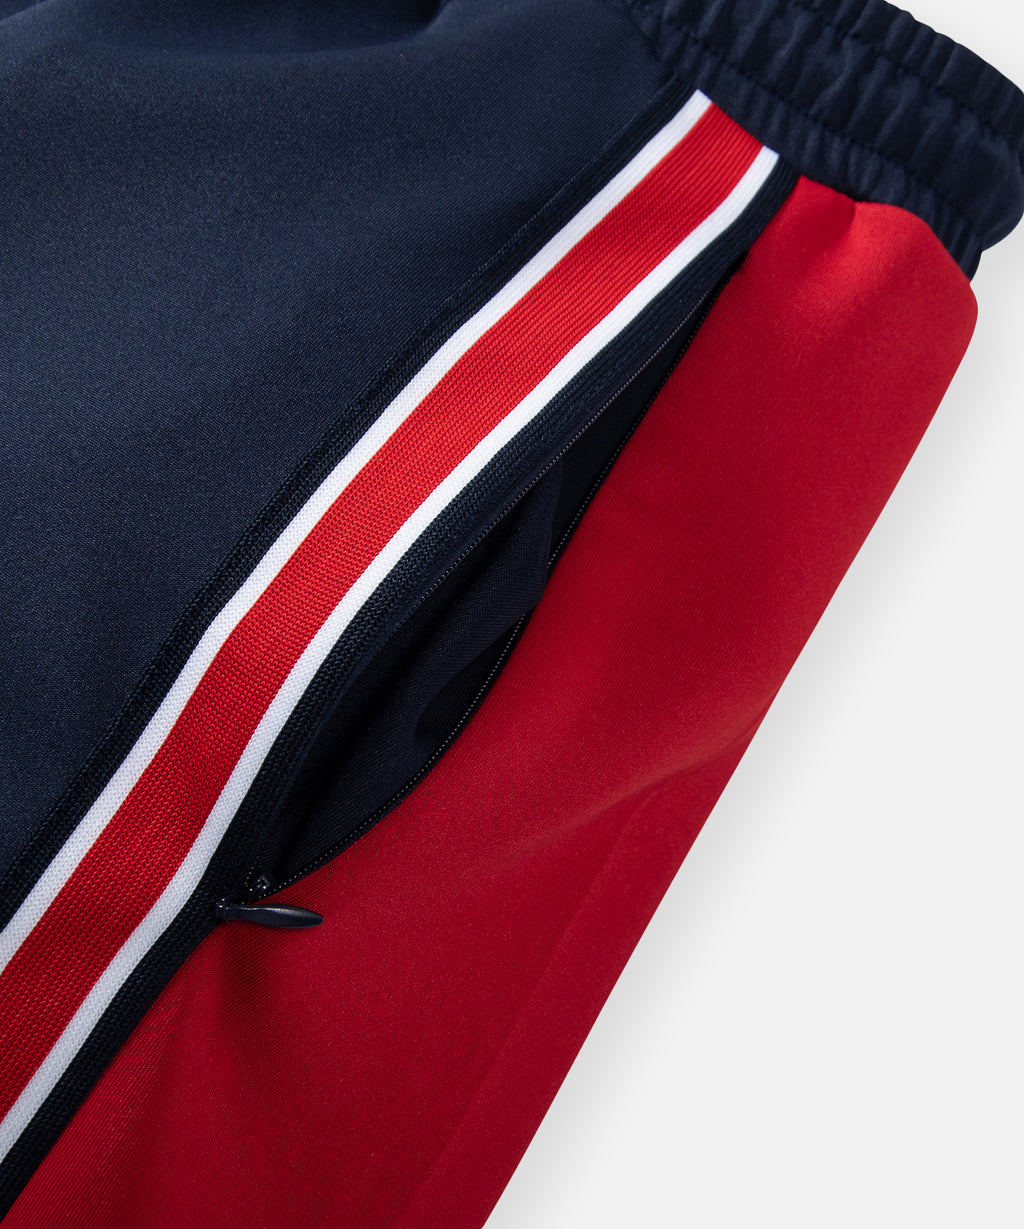  On-seam front pocket with hidden zipper on Paper Planes Basketball Short color Midnight.